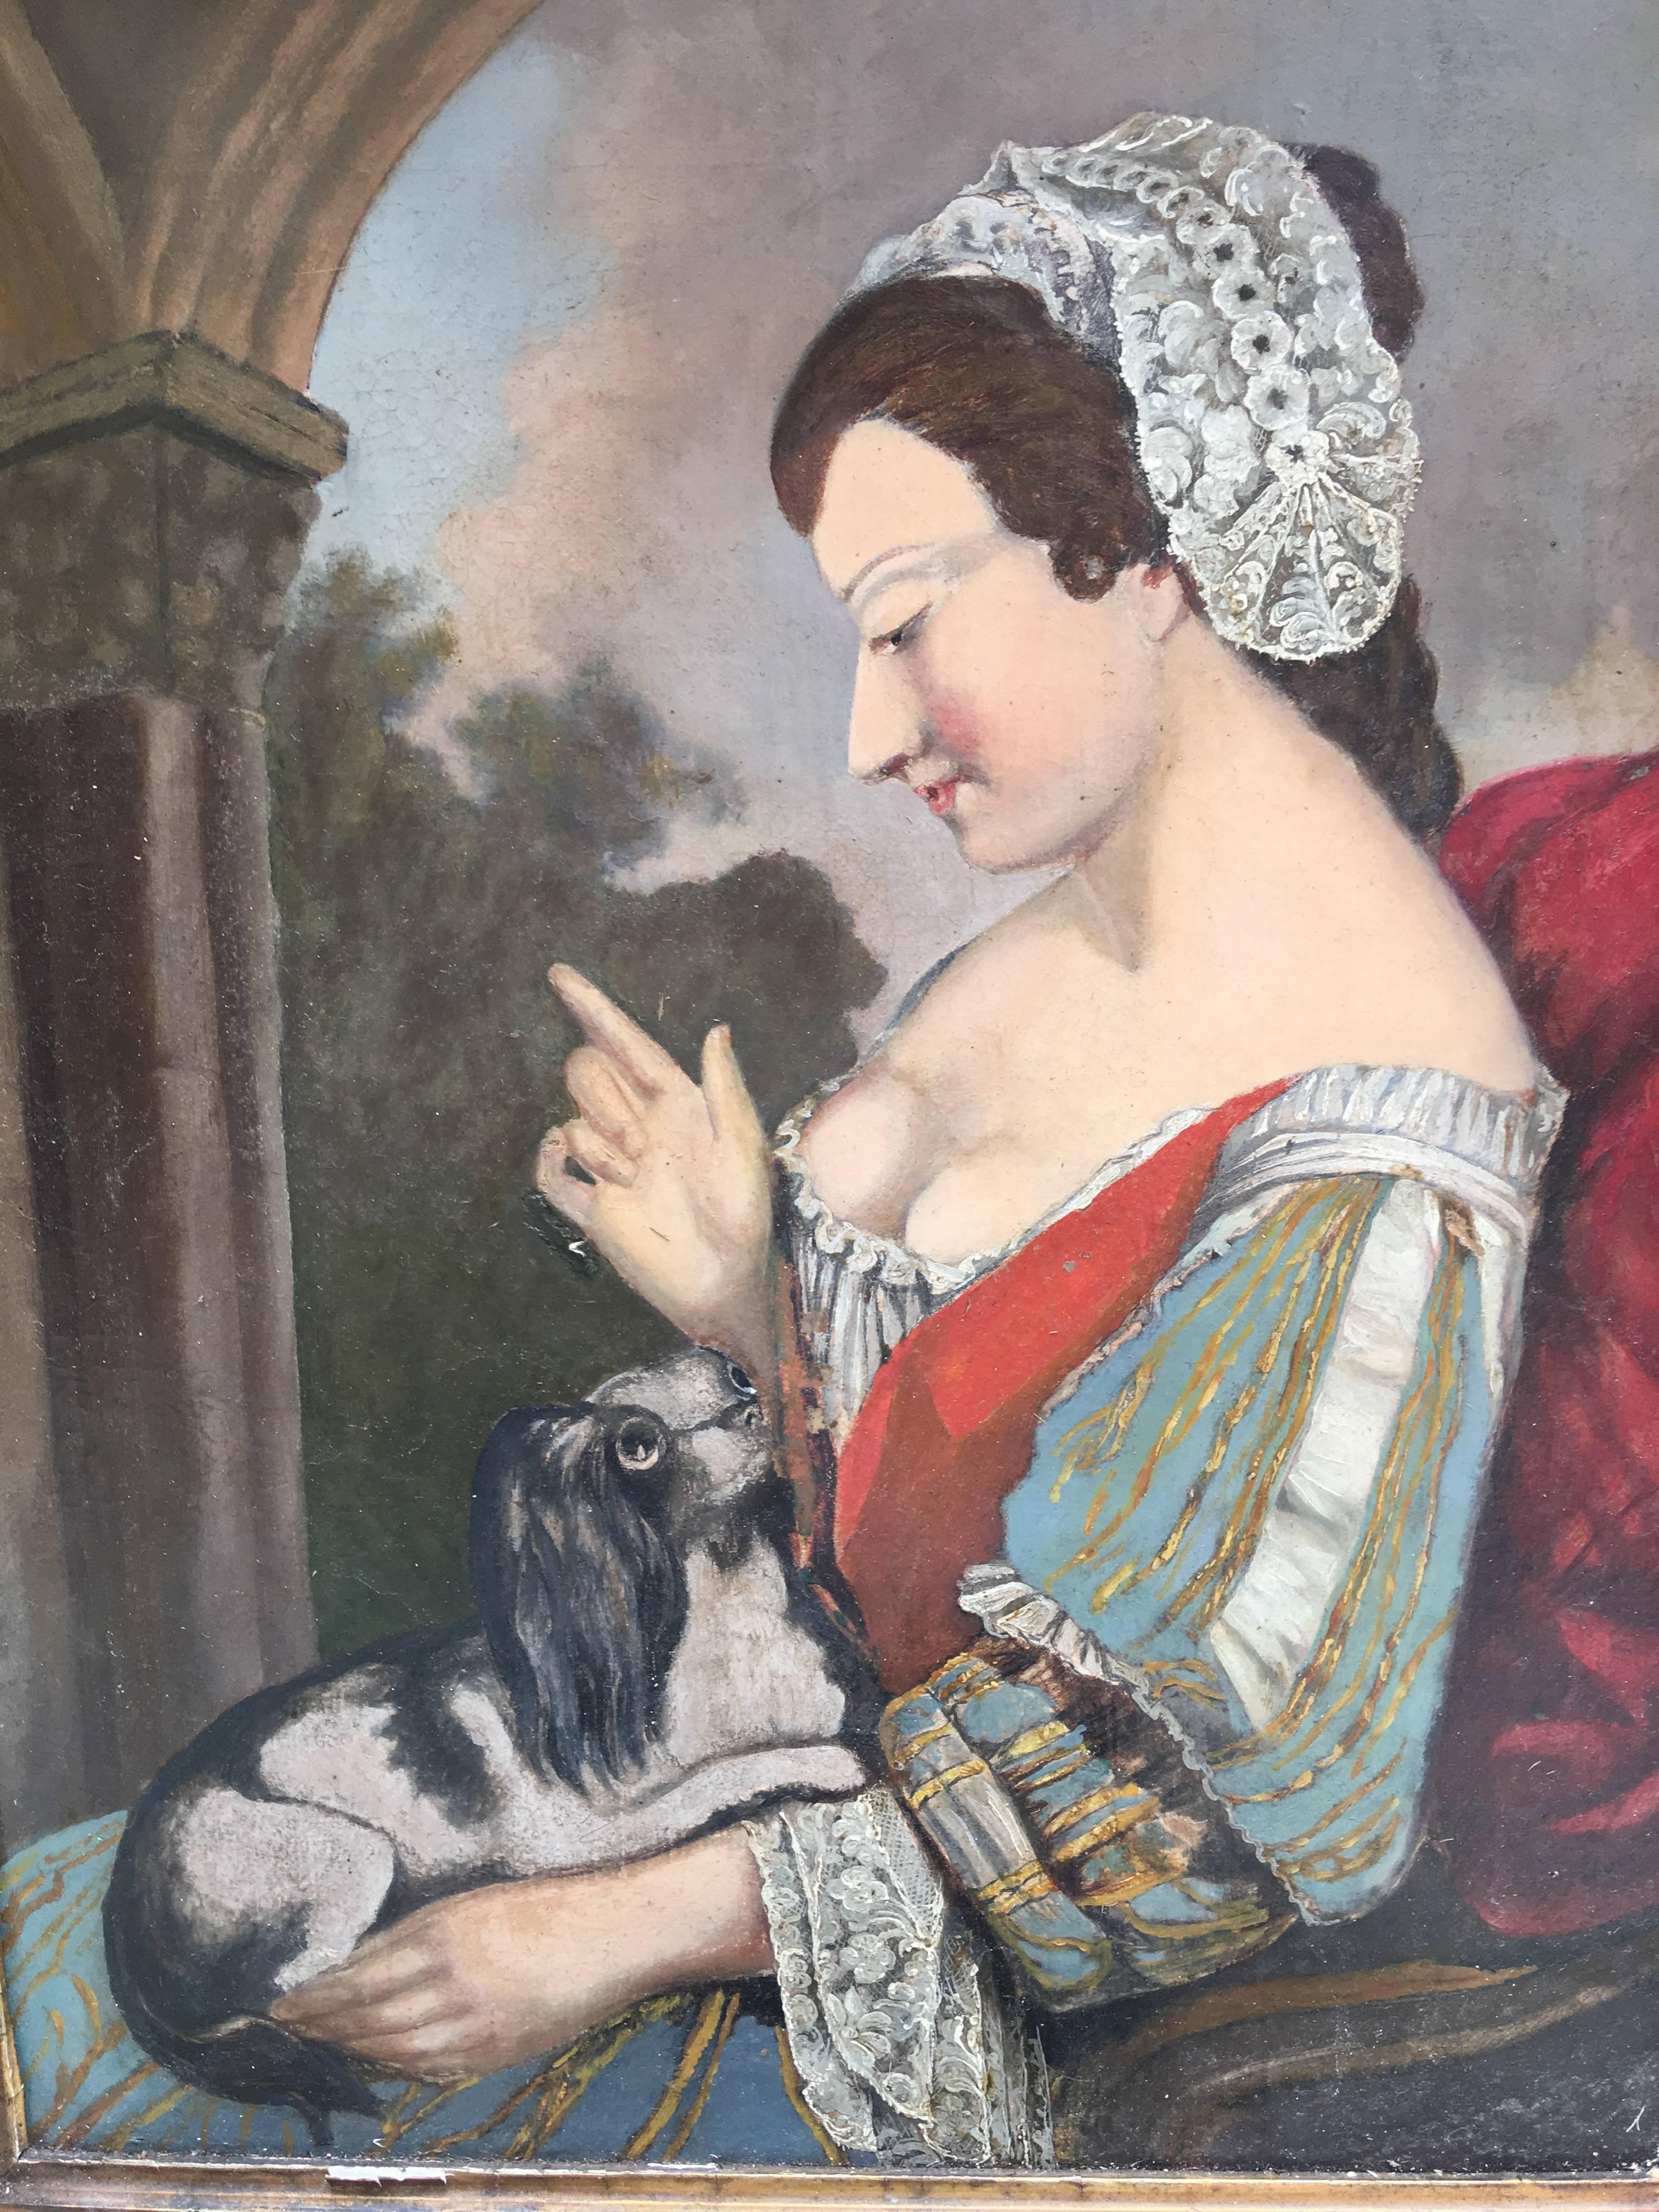 Oil on canvas of lady with King Charles Cavalier spaniel on lap.